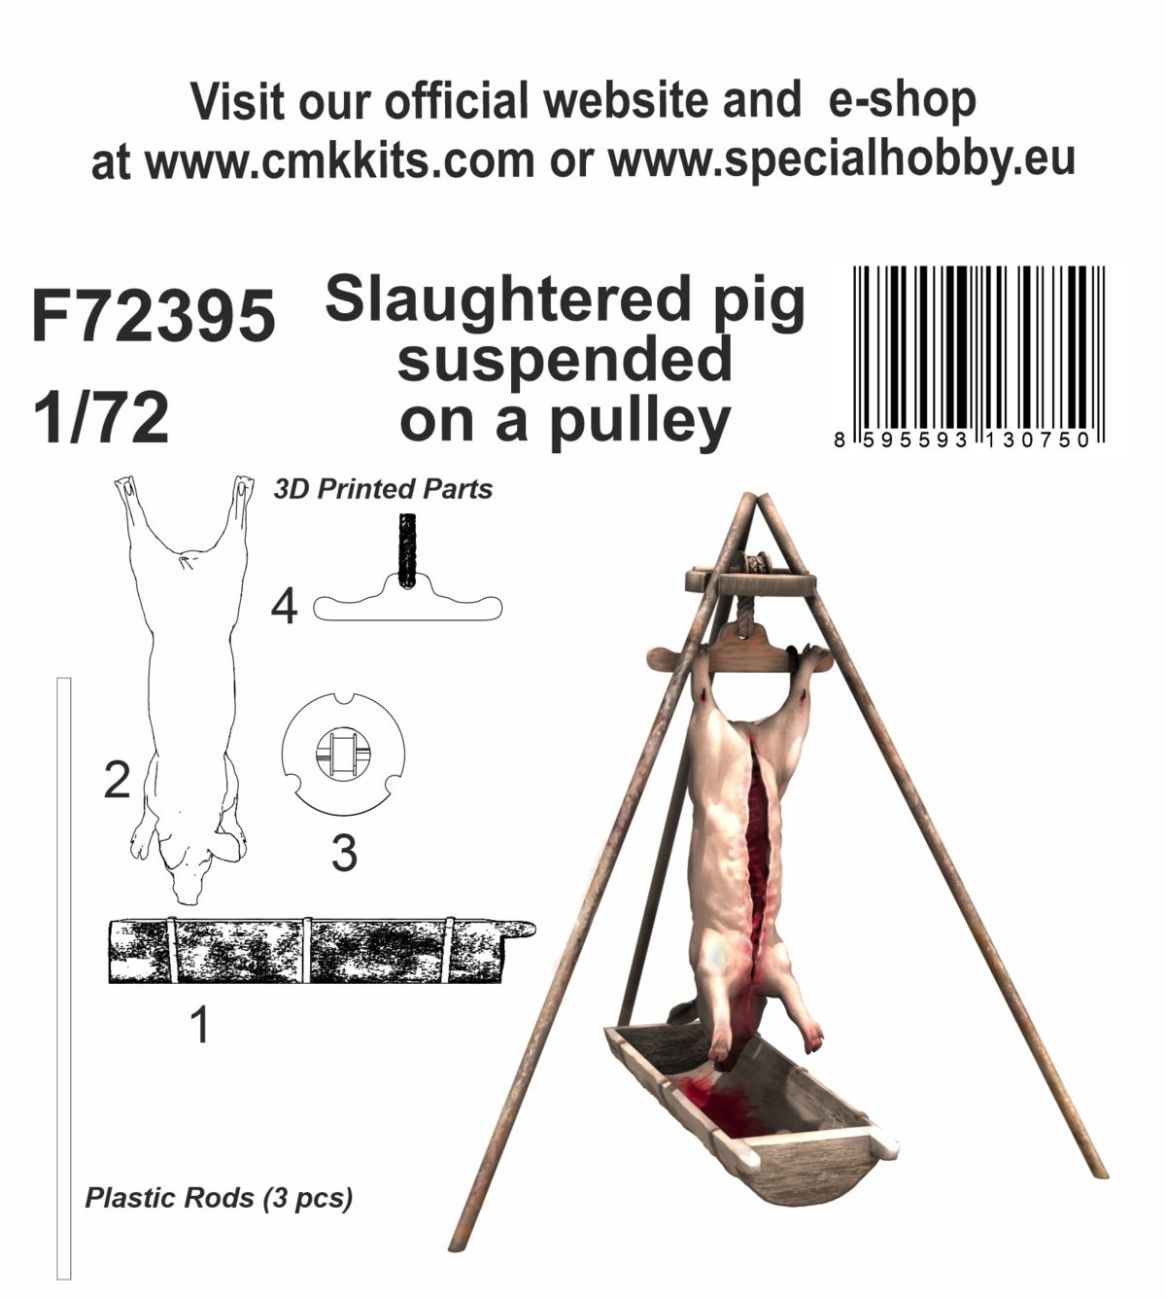 Slaughtered pig suspended on a pulley